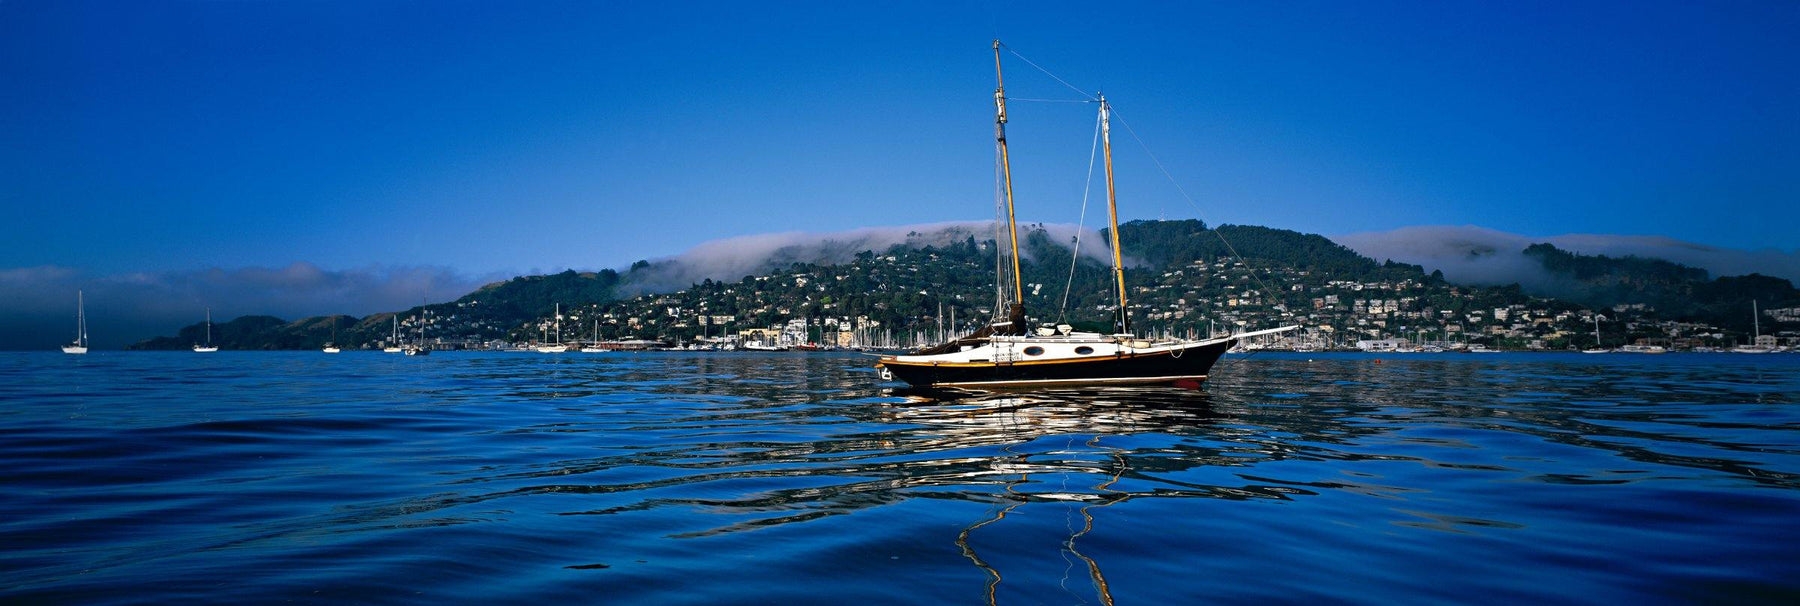 Sail boat reflecting in the middle of Richardson Bay with Sausalito Bay in the background